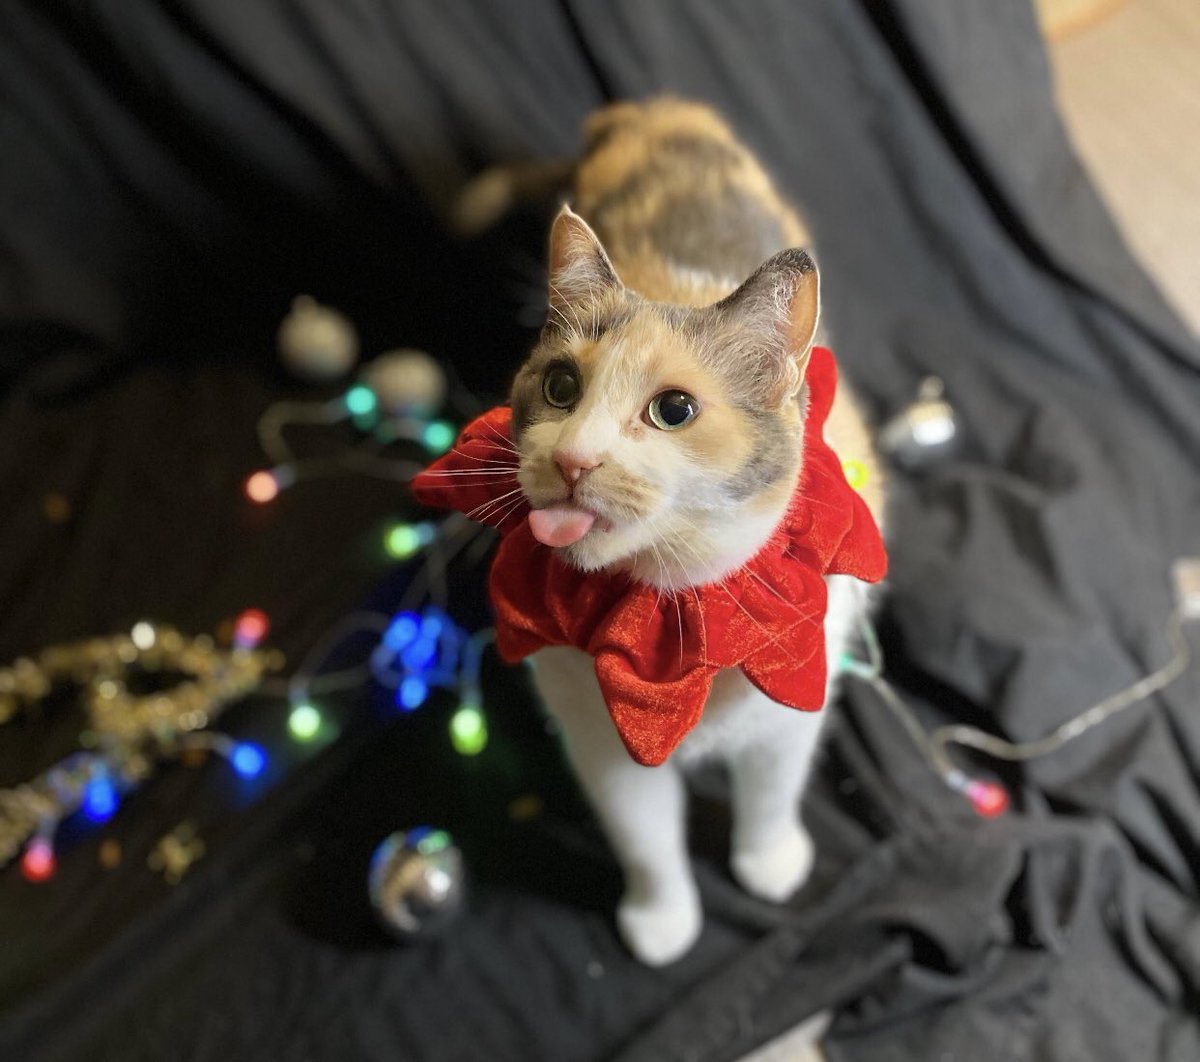 You know it.  #CatsHateChristmas   https://www.reddit.com/r/ChristmasCats/comments/k2yxps/gizmo_isnt_sure_about_her_christmas_photos/